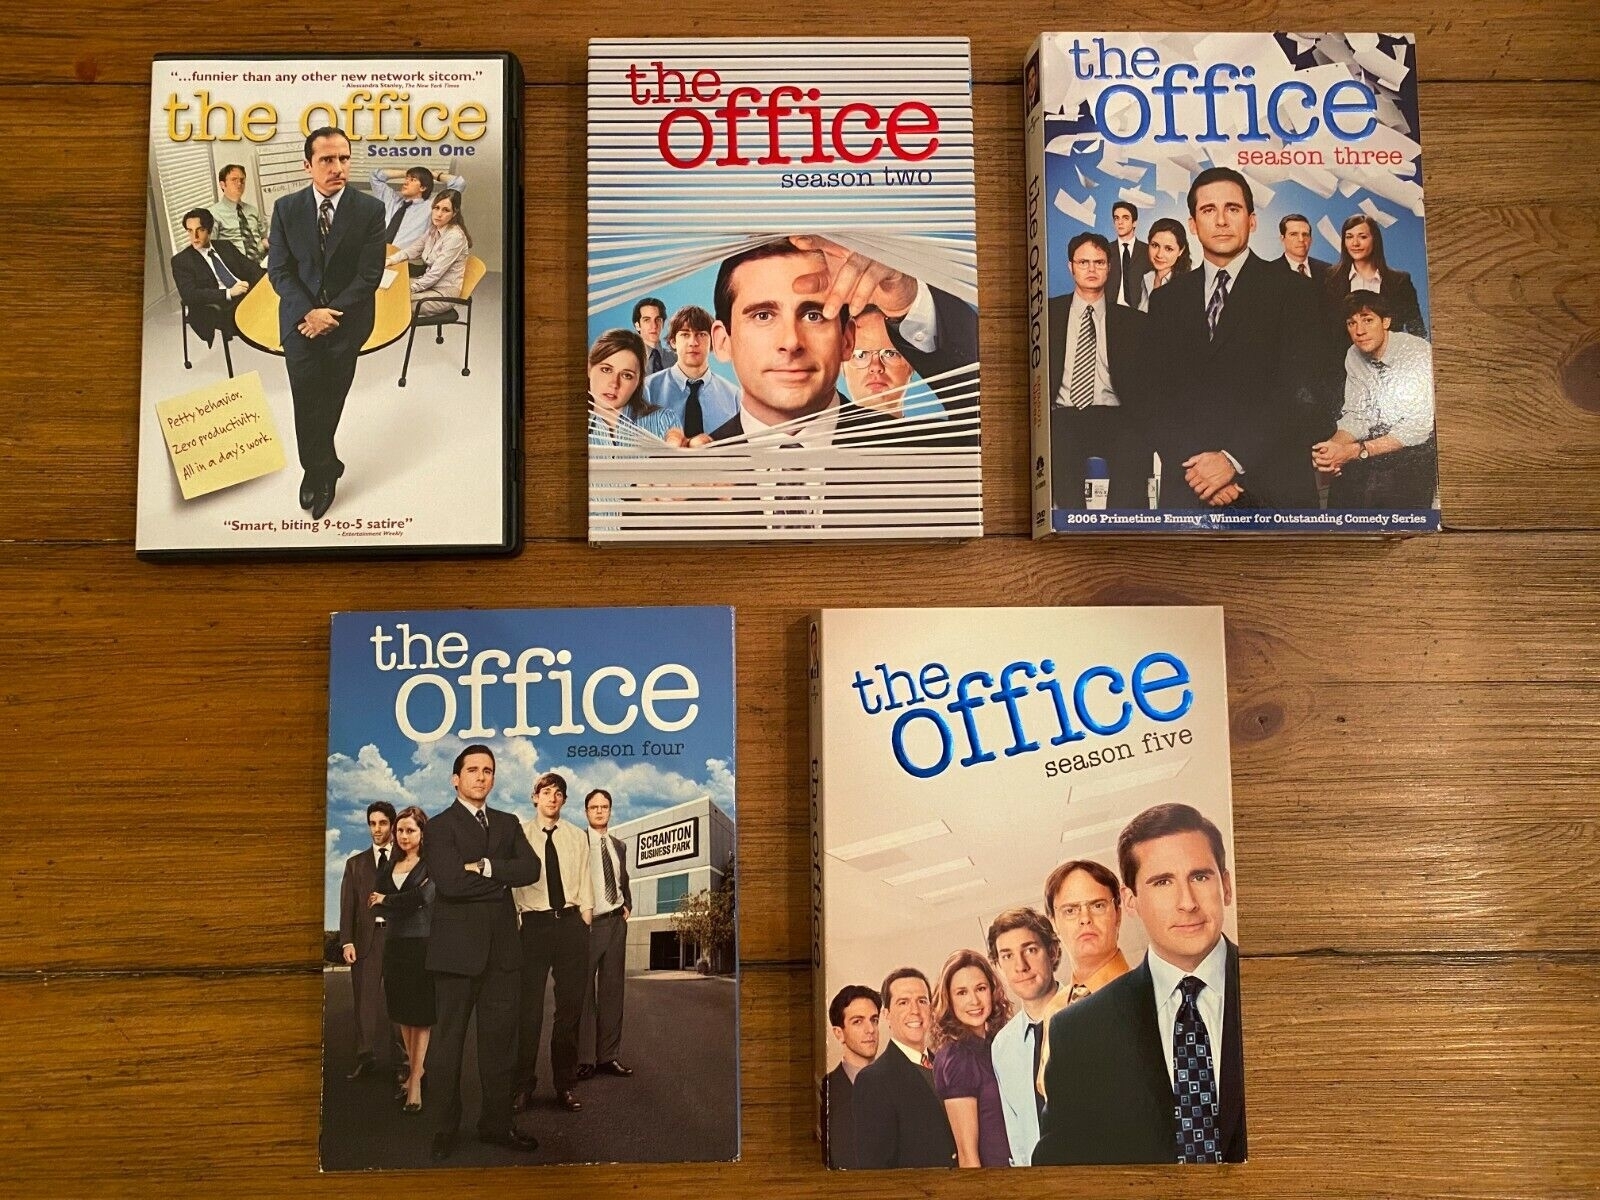 dvd sets of the office